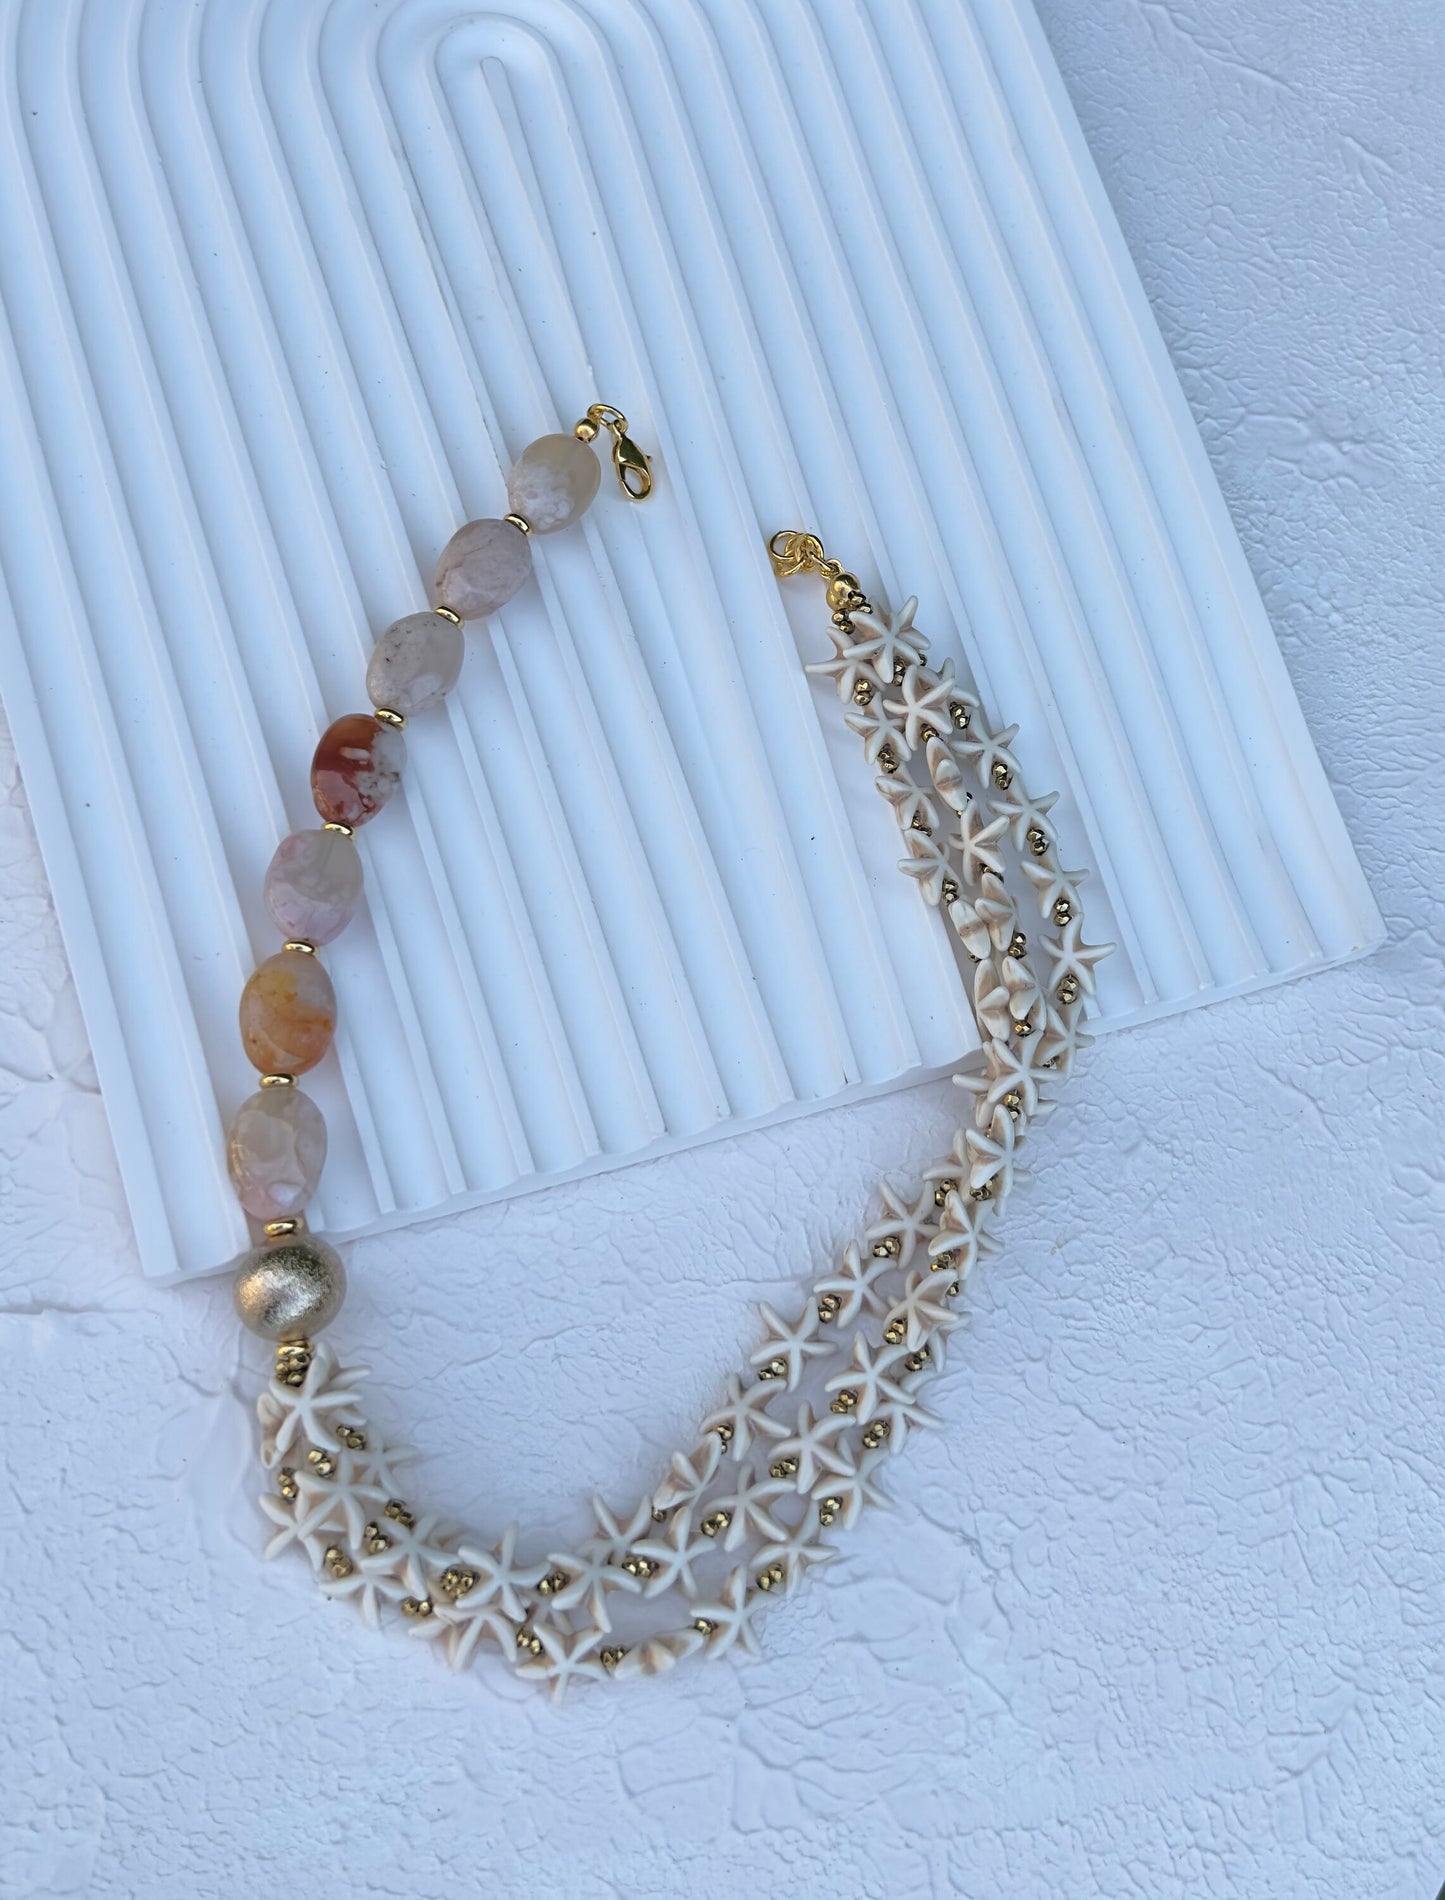 Agate Necklace, Star Jewelry, Summer Necklace, Unique Handmade Jewelry, Birthday Gift